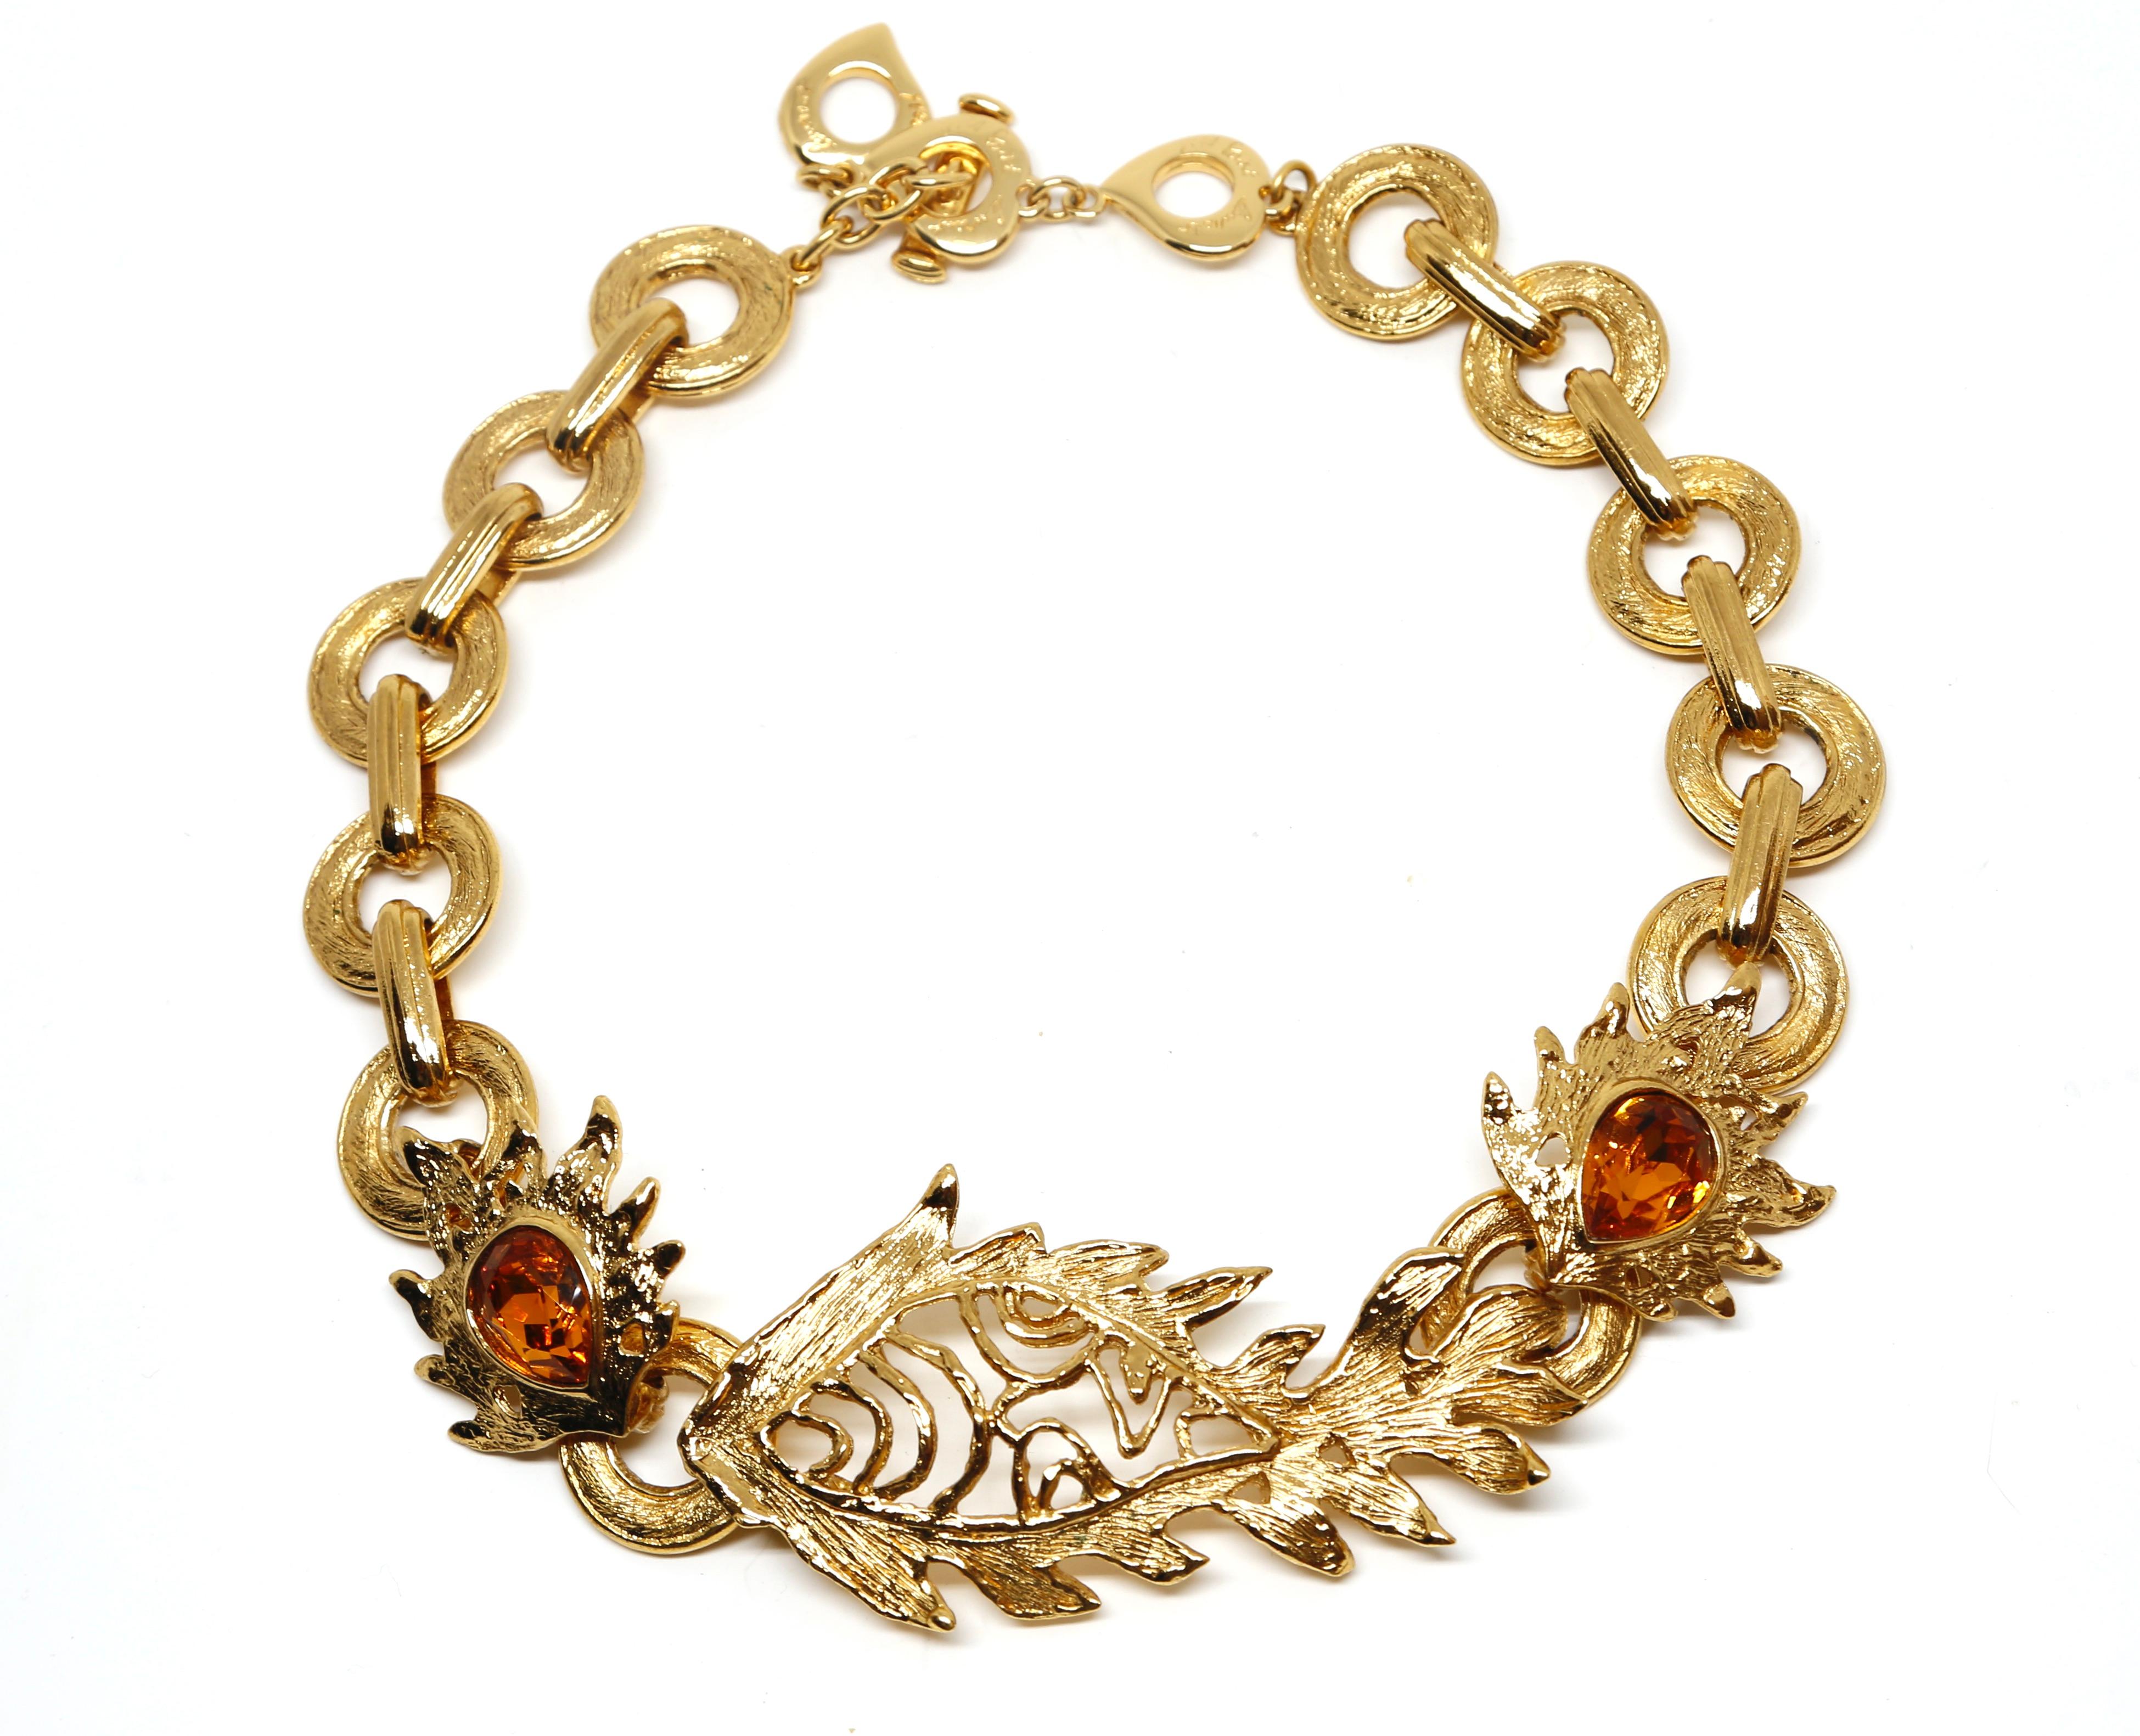 Gilt metal necklace in an unusual fish motif with faceted topaz crystals made by Robert Goossens for Yves Saint Laurent dating to the late 1980's, early 1990's. Necklace measures approximately: 18.25